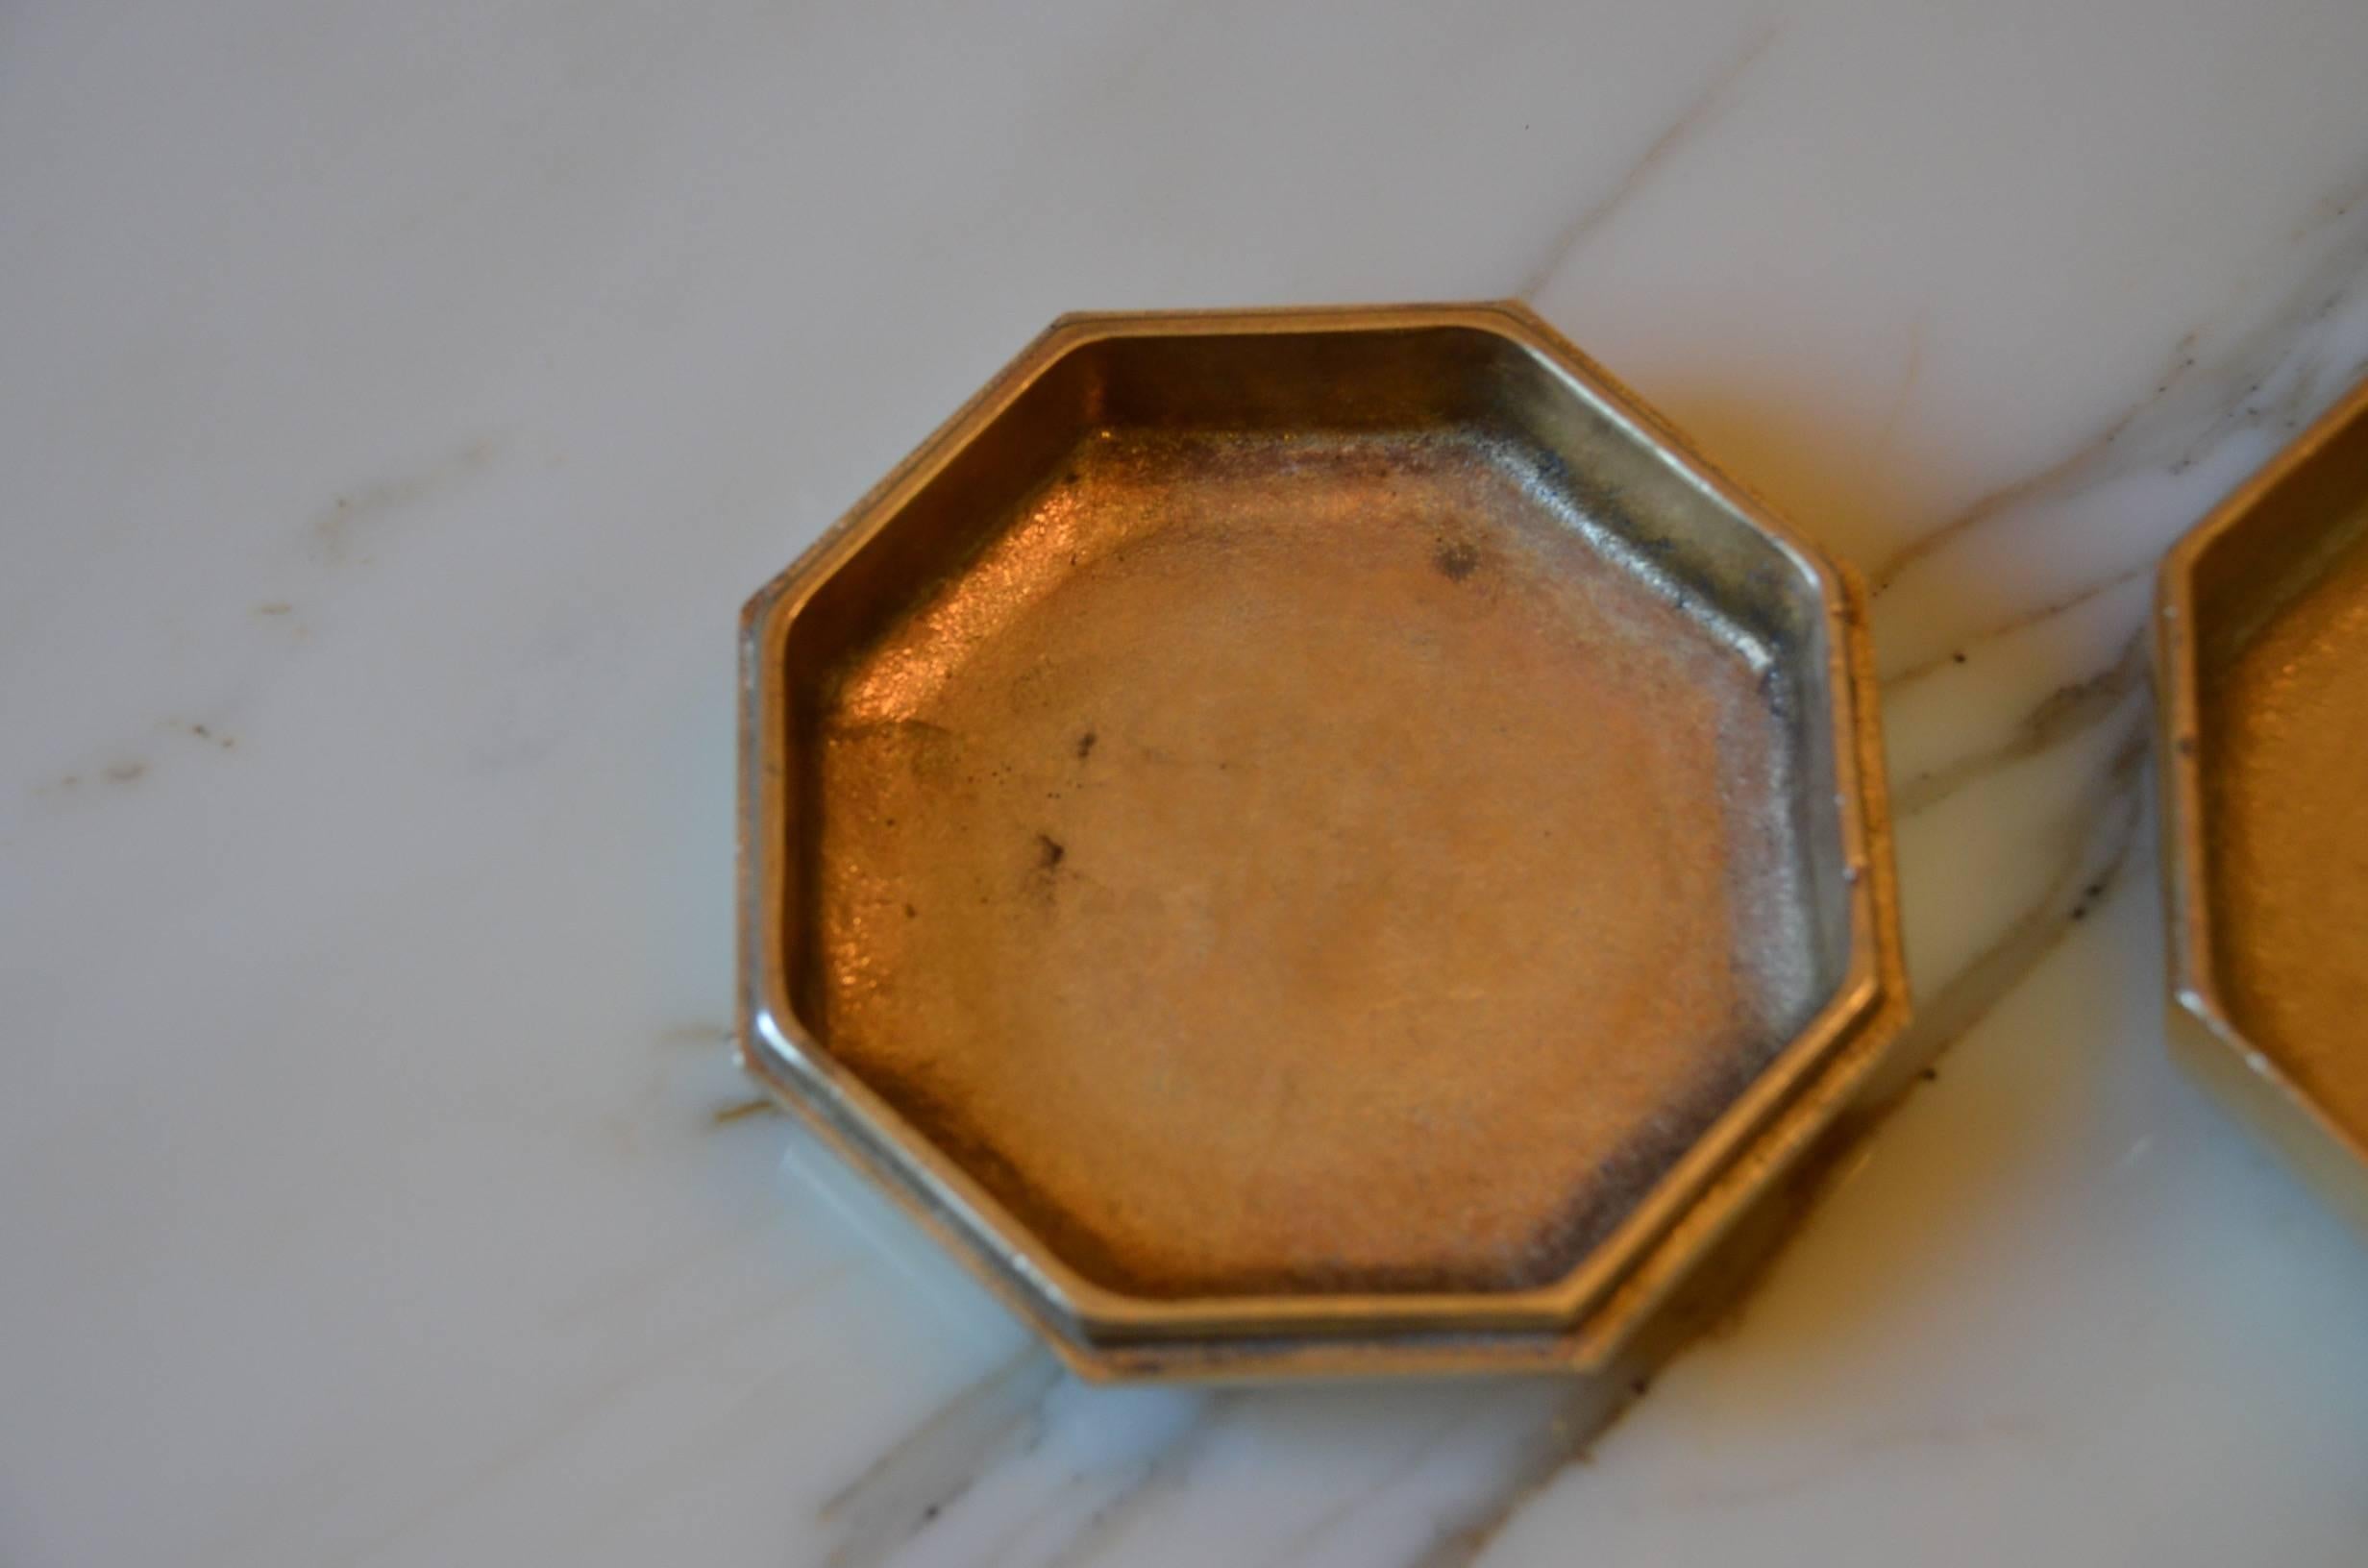 Octagonal covered decorative bowl in heavy bronze, Italy 1970s Esart by Esa Fegdrigolli. Signed underneath by the artist and with label [Esart/Made in Italy]. In very good condition with no chips.

Dimensions:

Diameter: 12 cm.
Height: 5.8